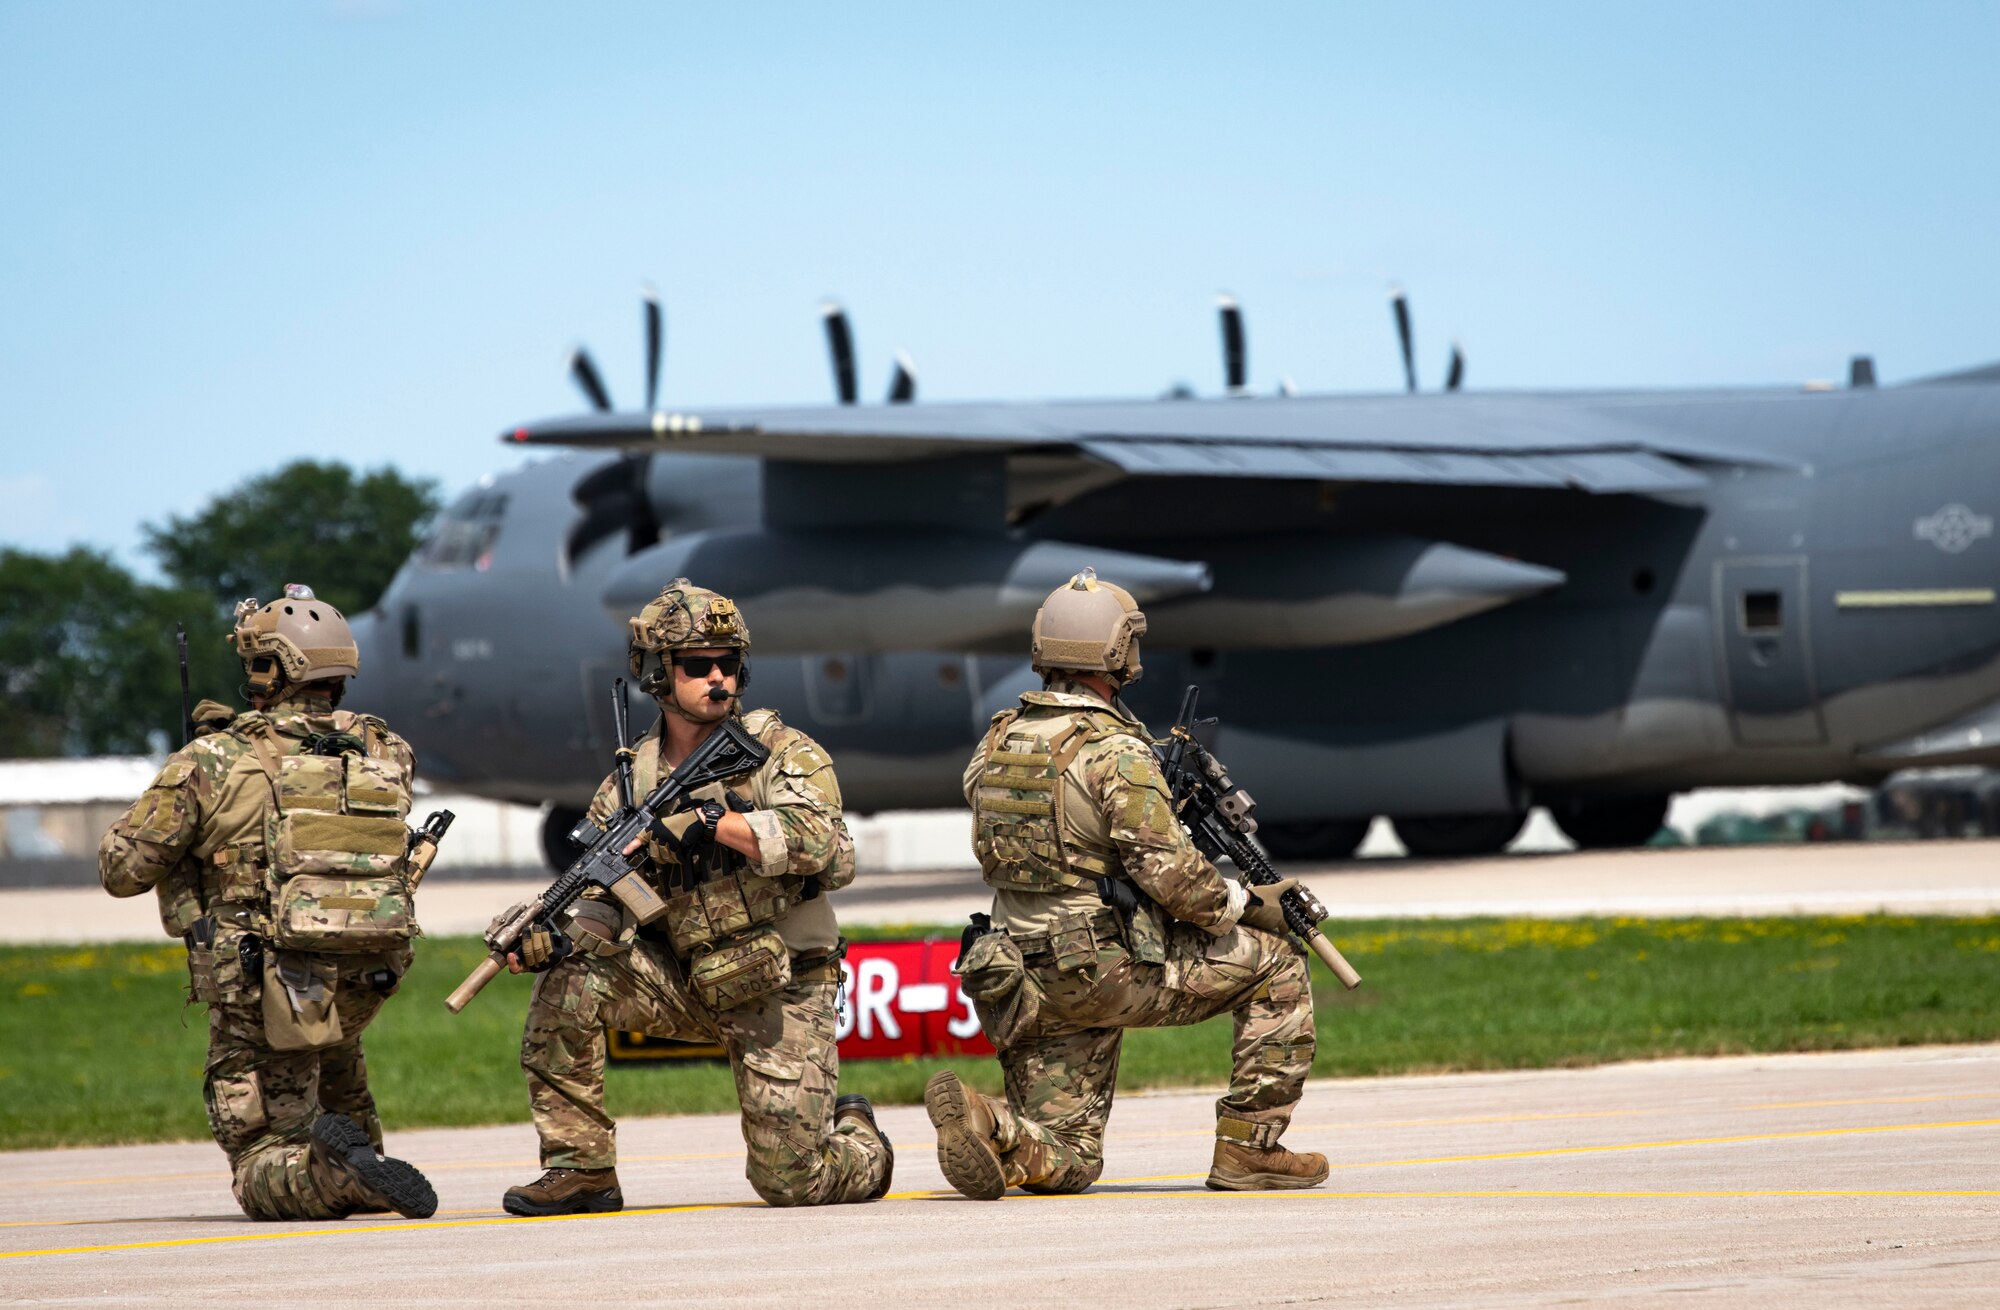 U.S. Air Force special tactics Airmen with the Air Force Special Operations Command provide security during a personnel recovery demonstration at Wittman Regional Airport, Wis., July 30, 2021.